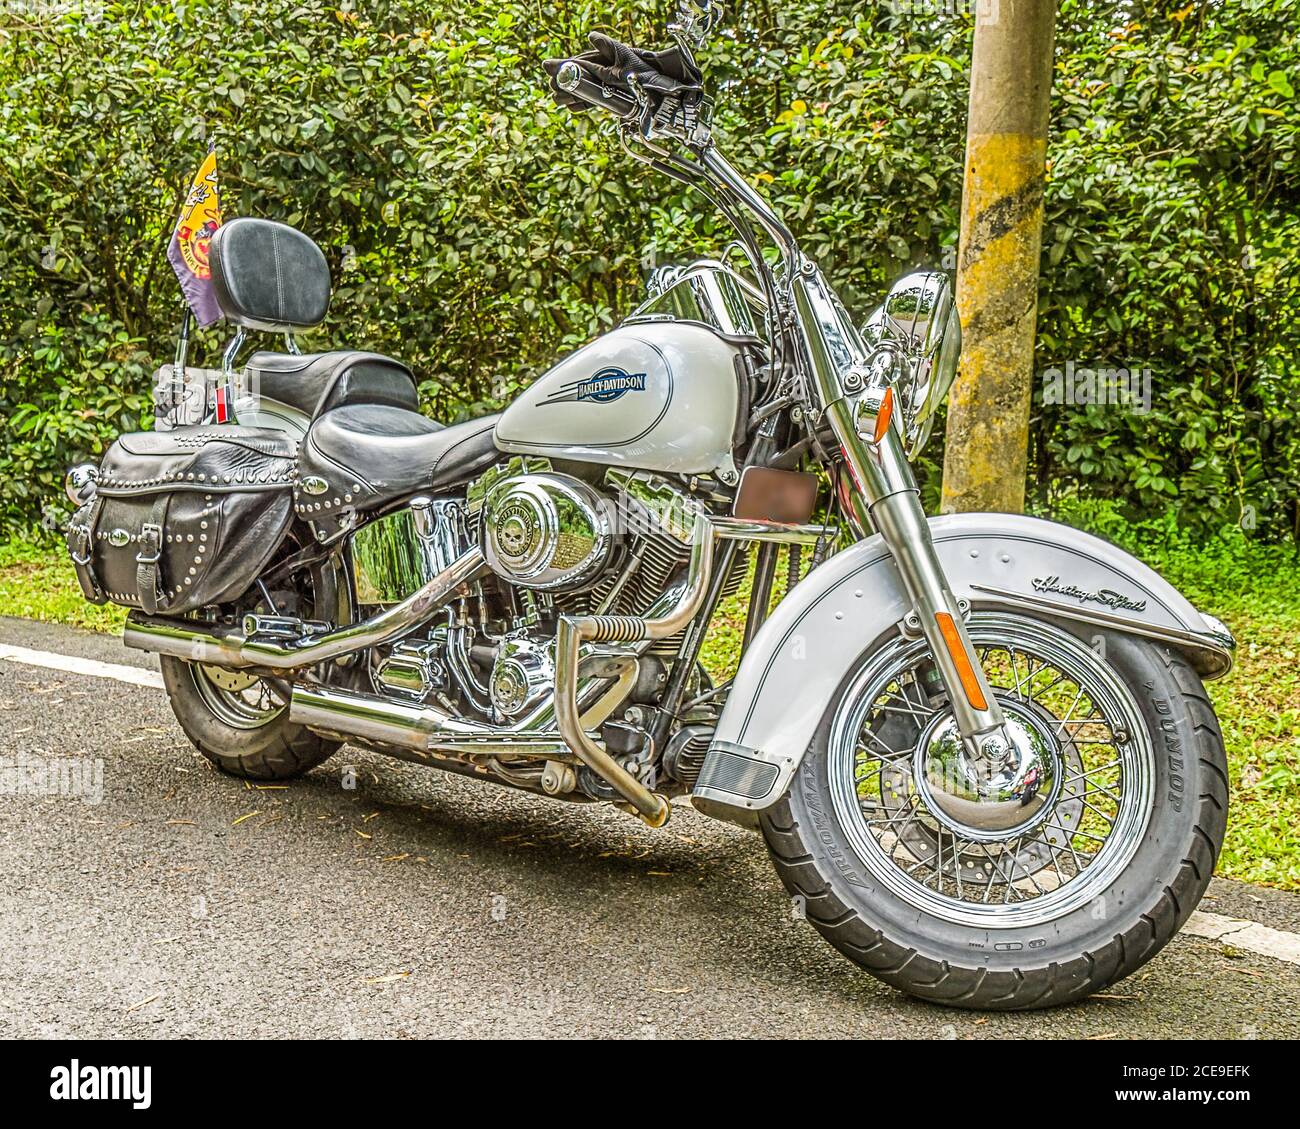 Harley Davidson Heritage Softail High Resolution Stock Photography And Images Alamy